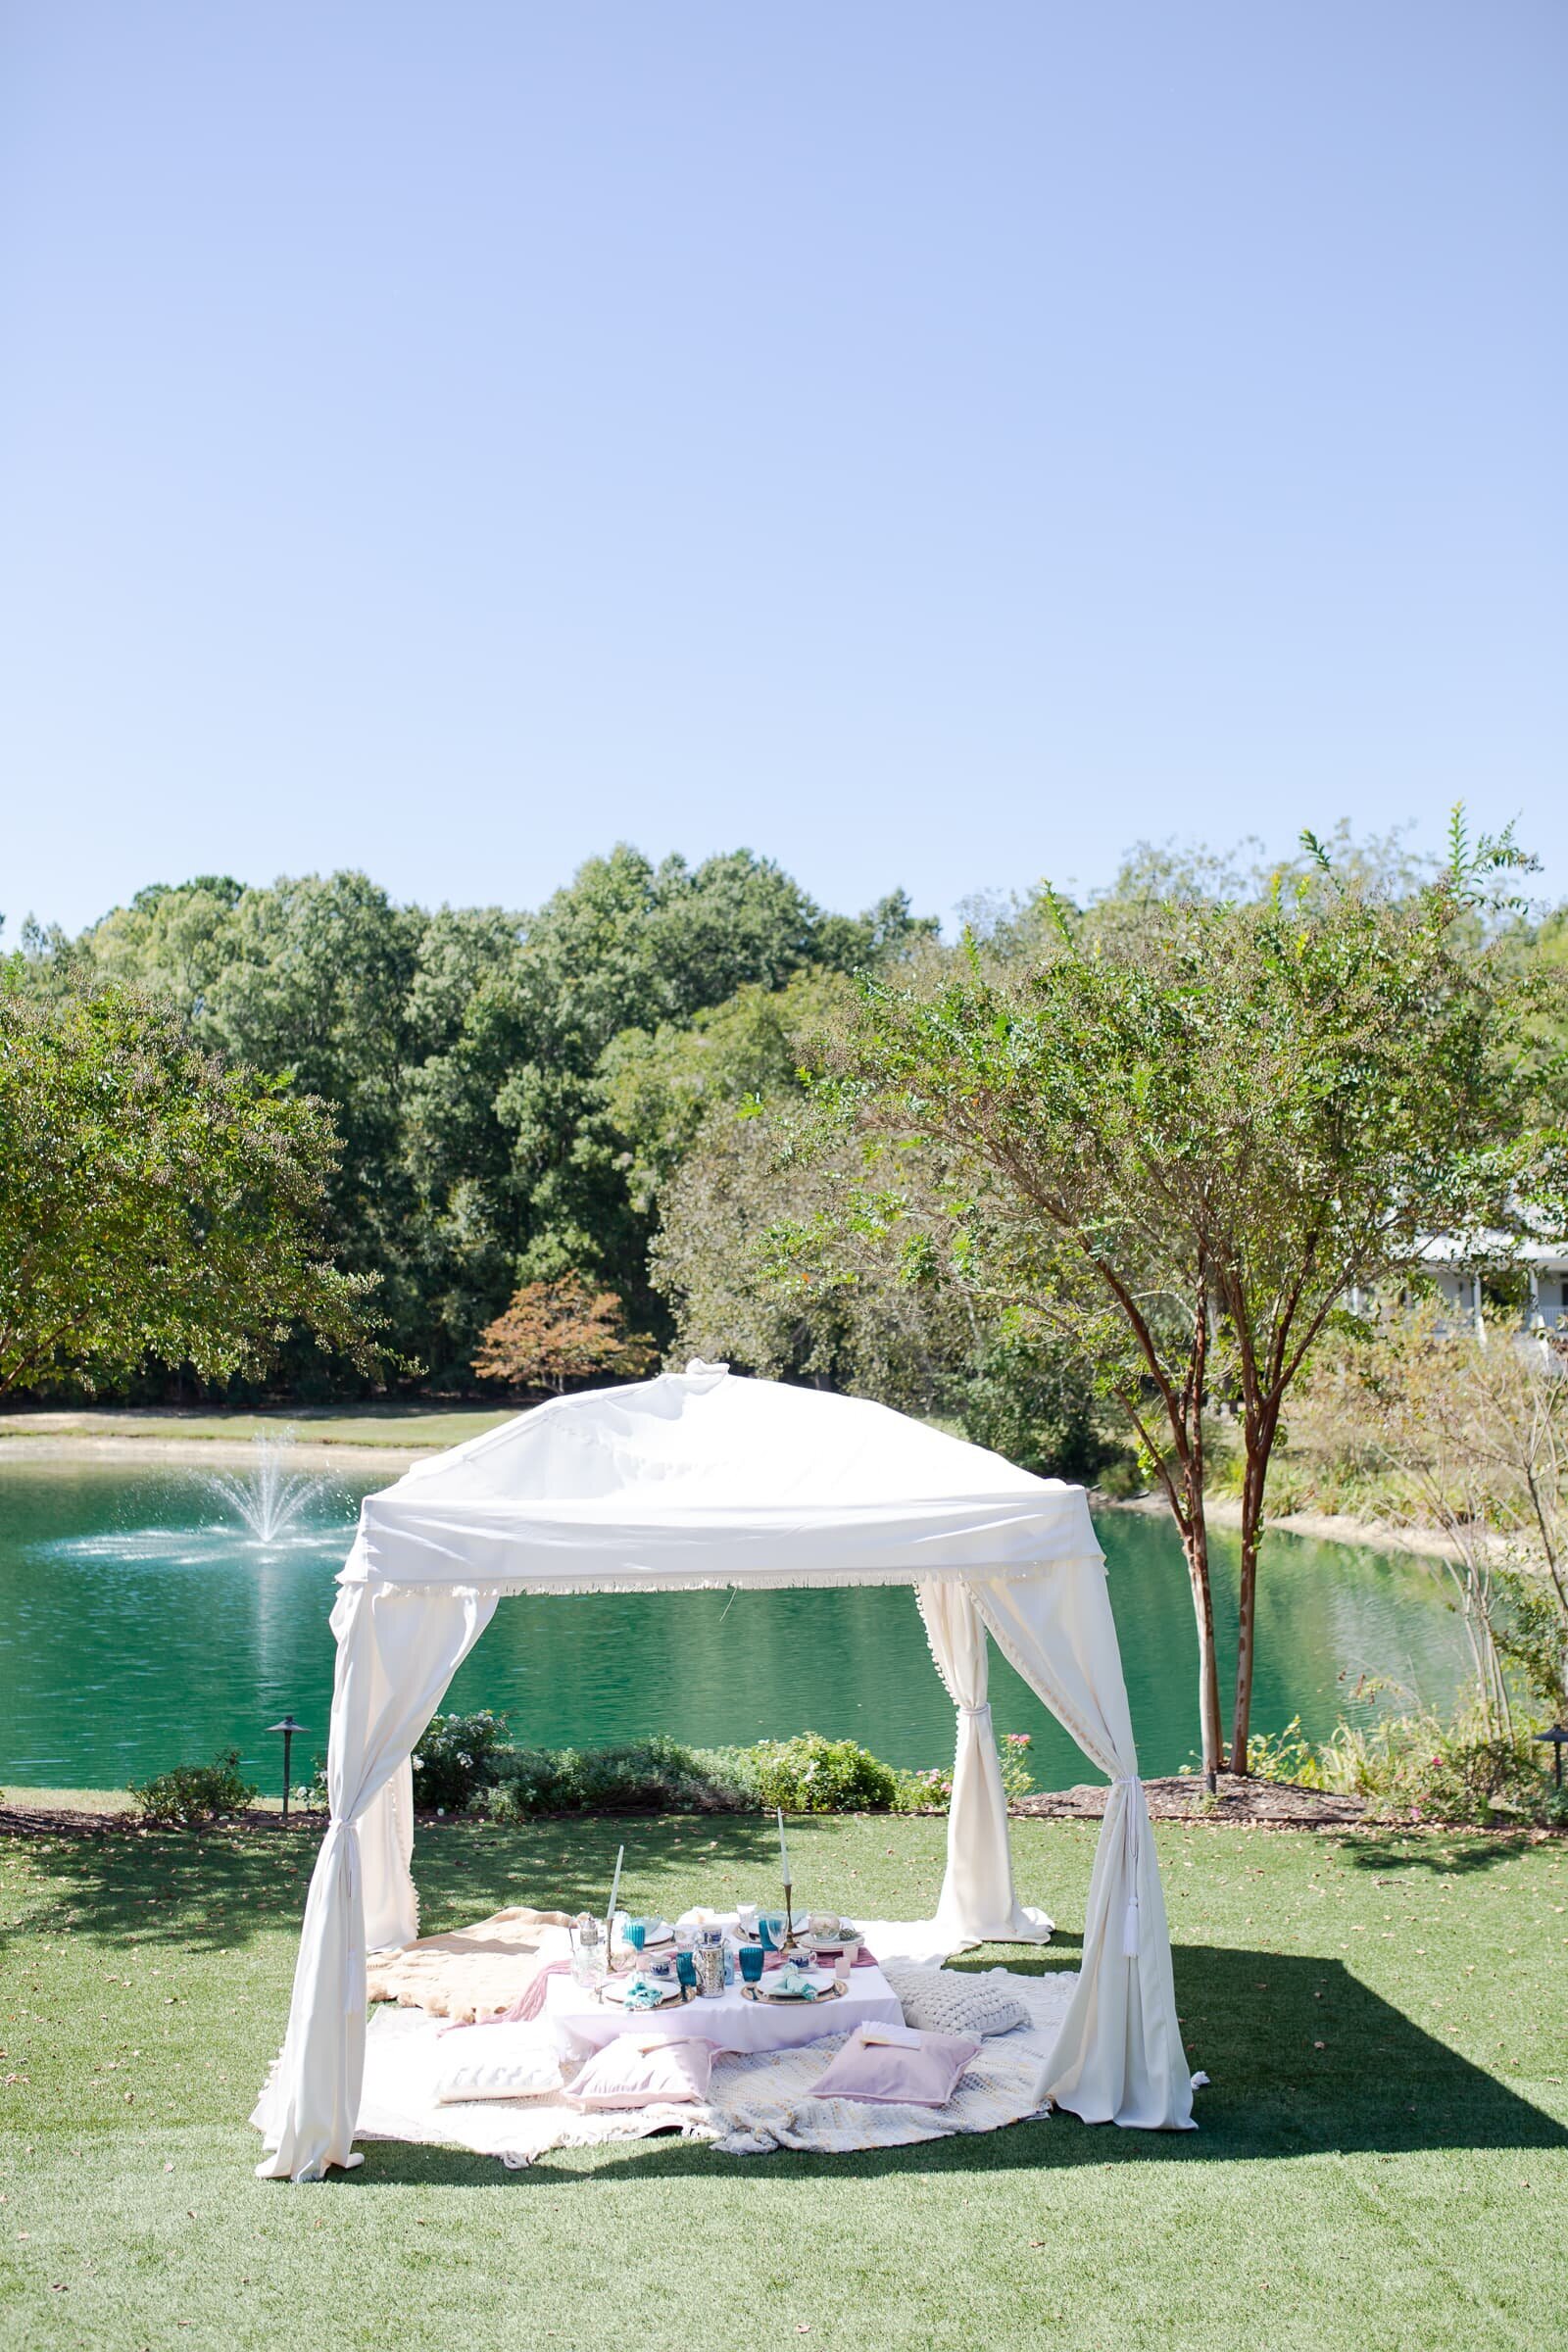 posh picnic setup overlooking a pond at the Walnut hill in Raleigh.